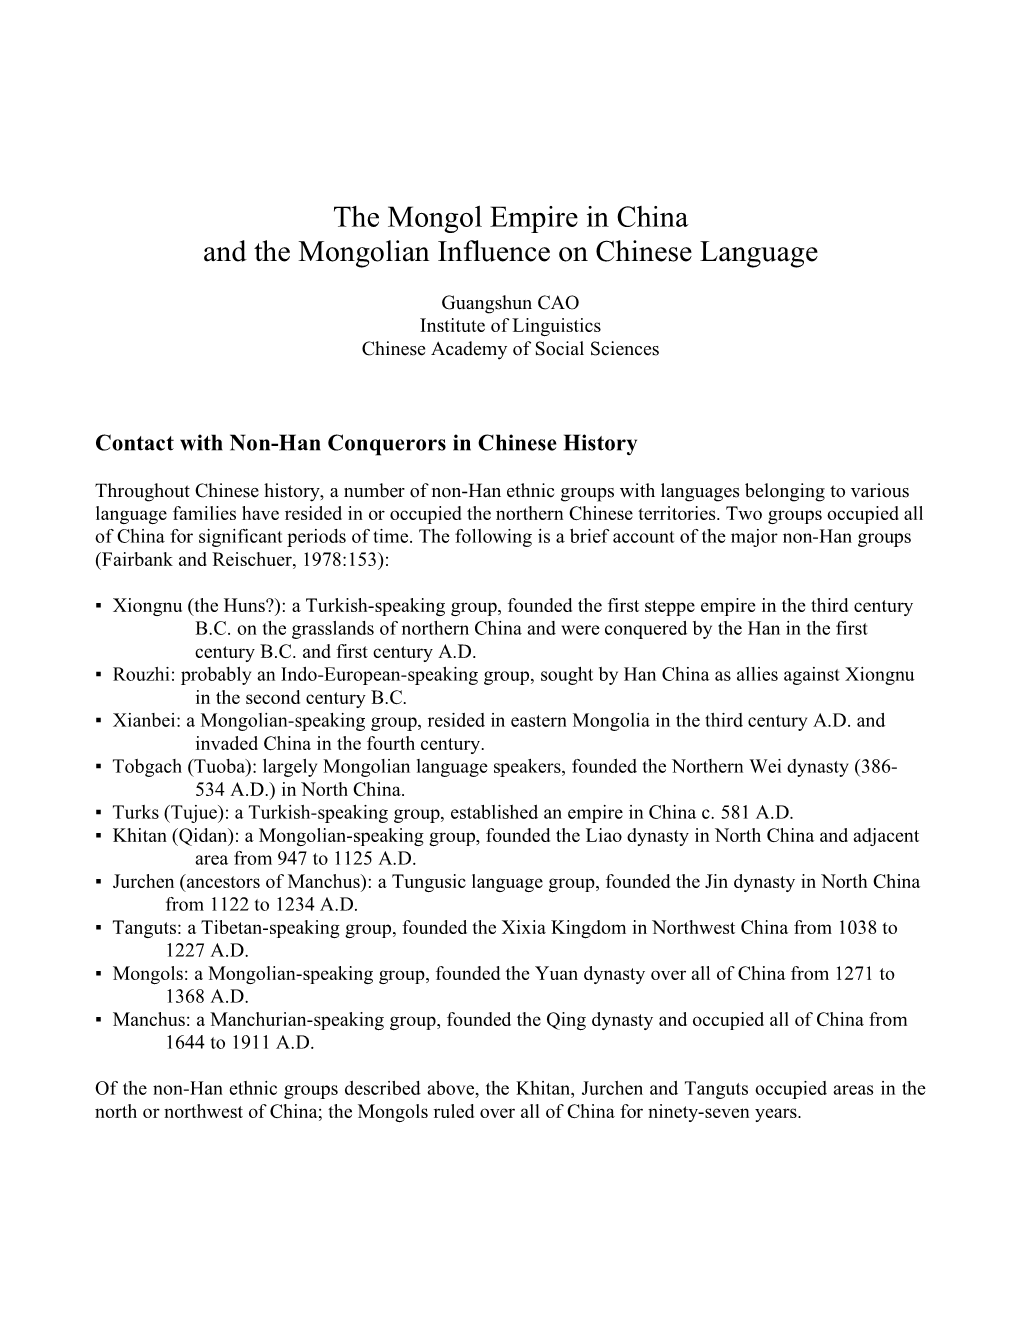 The Mongol Empire in China and the Mongolian Influence on Chinese Language